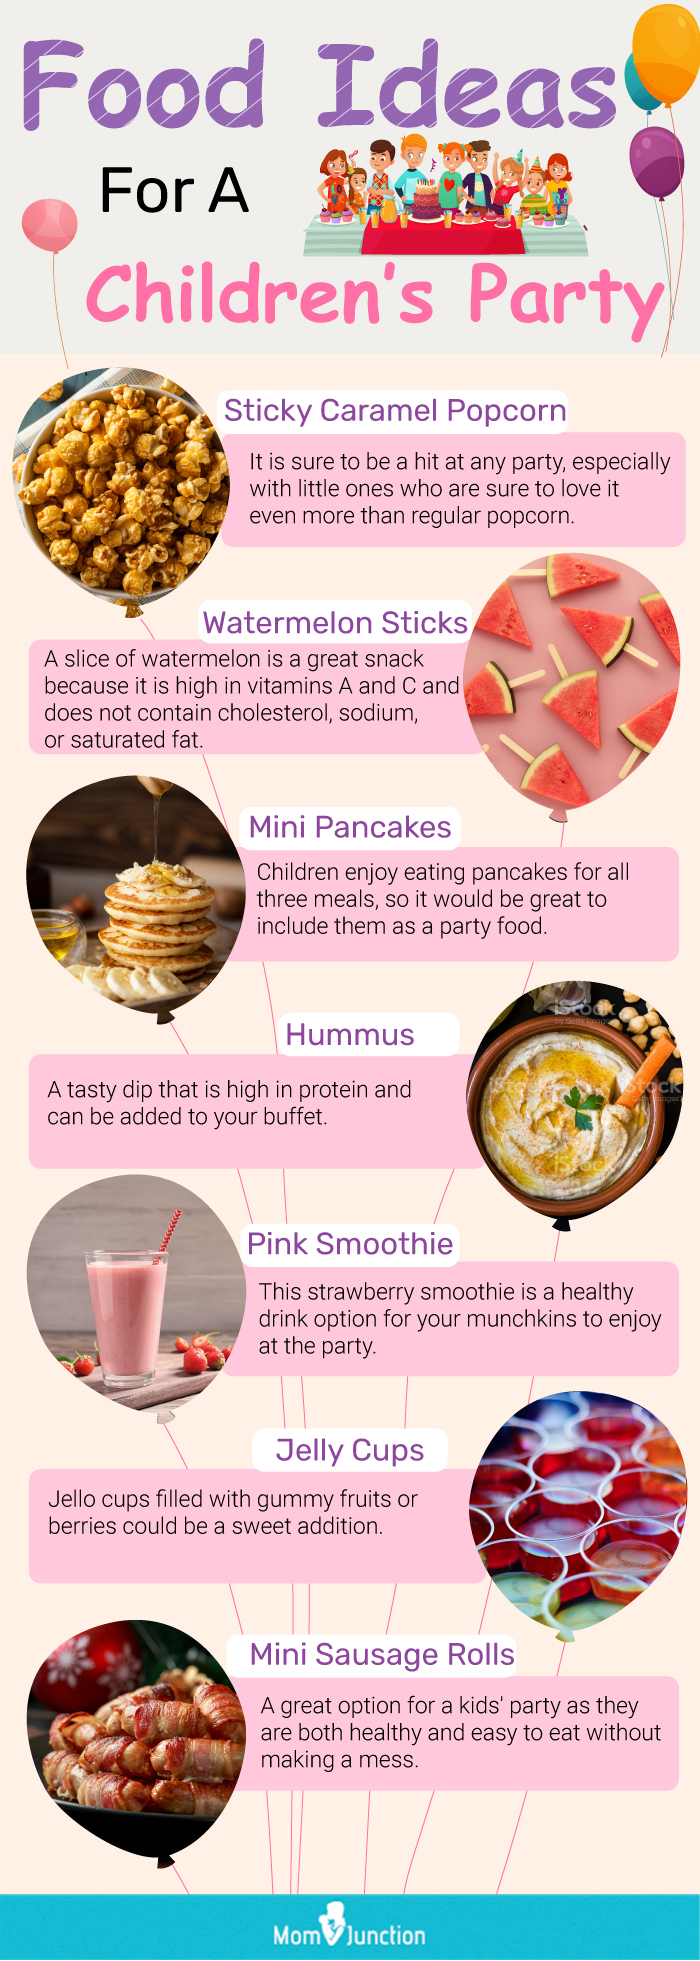 party food ideas for children (infographic)